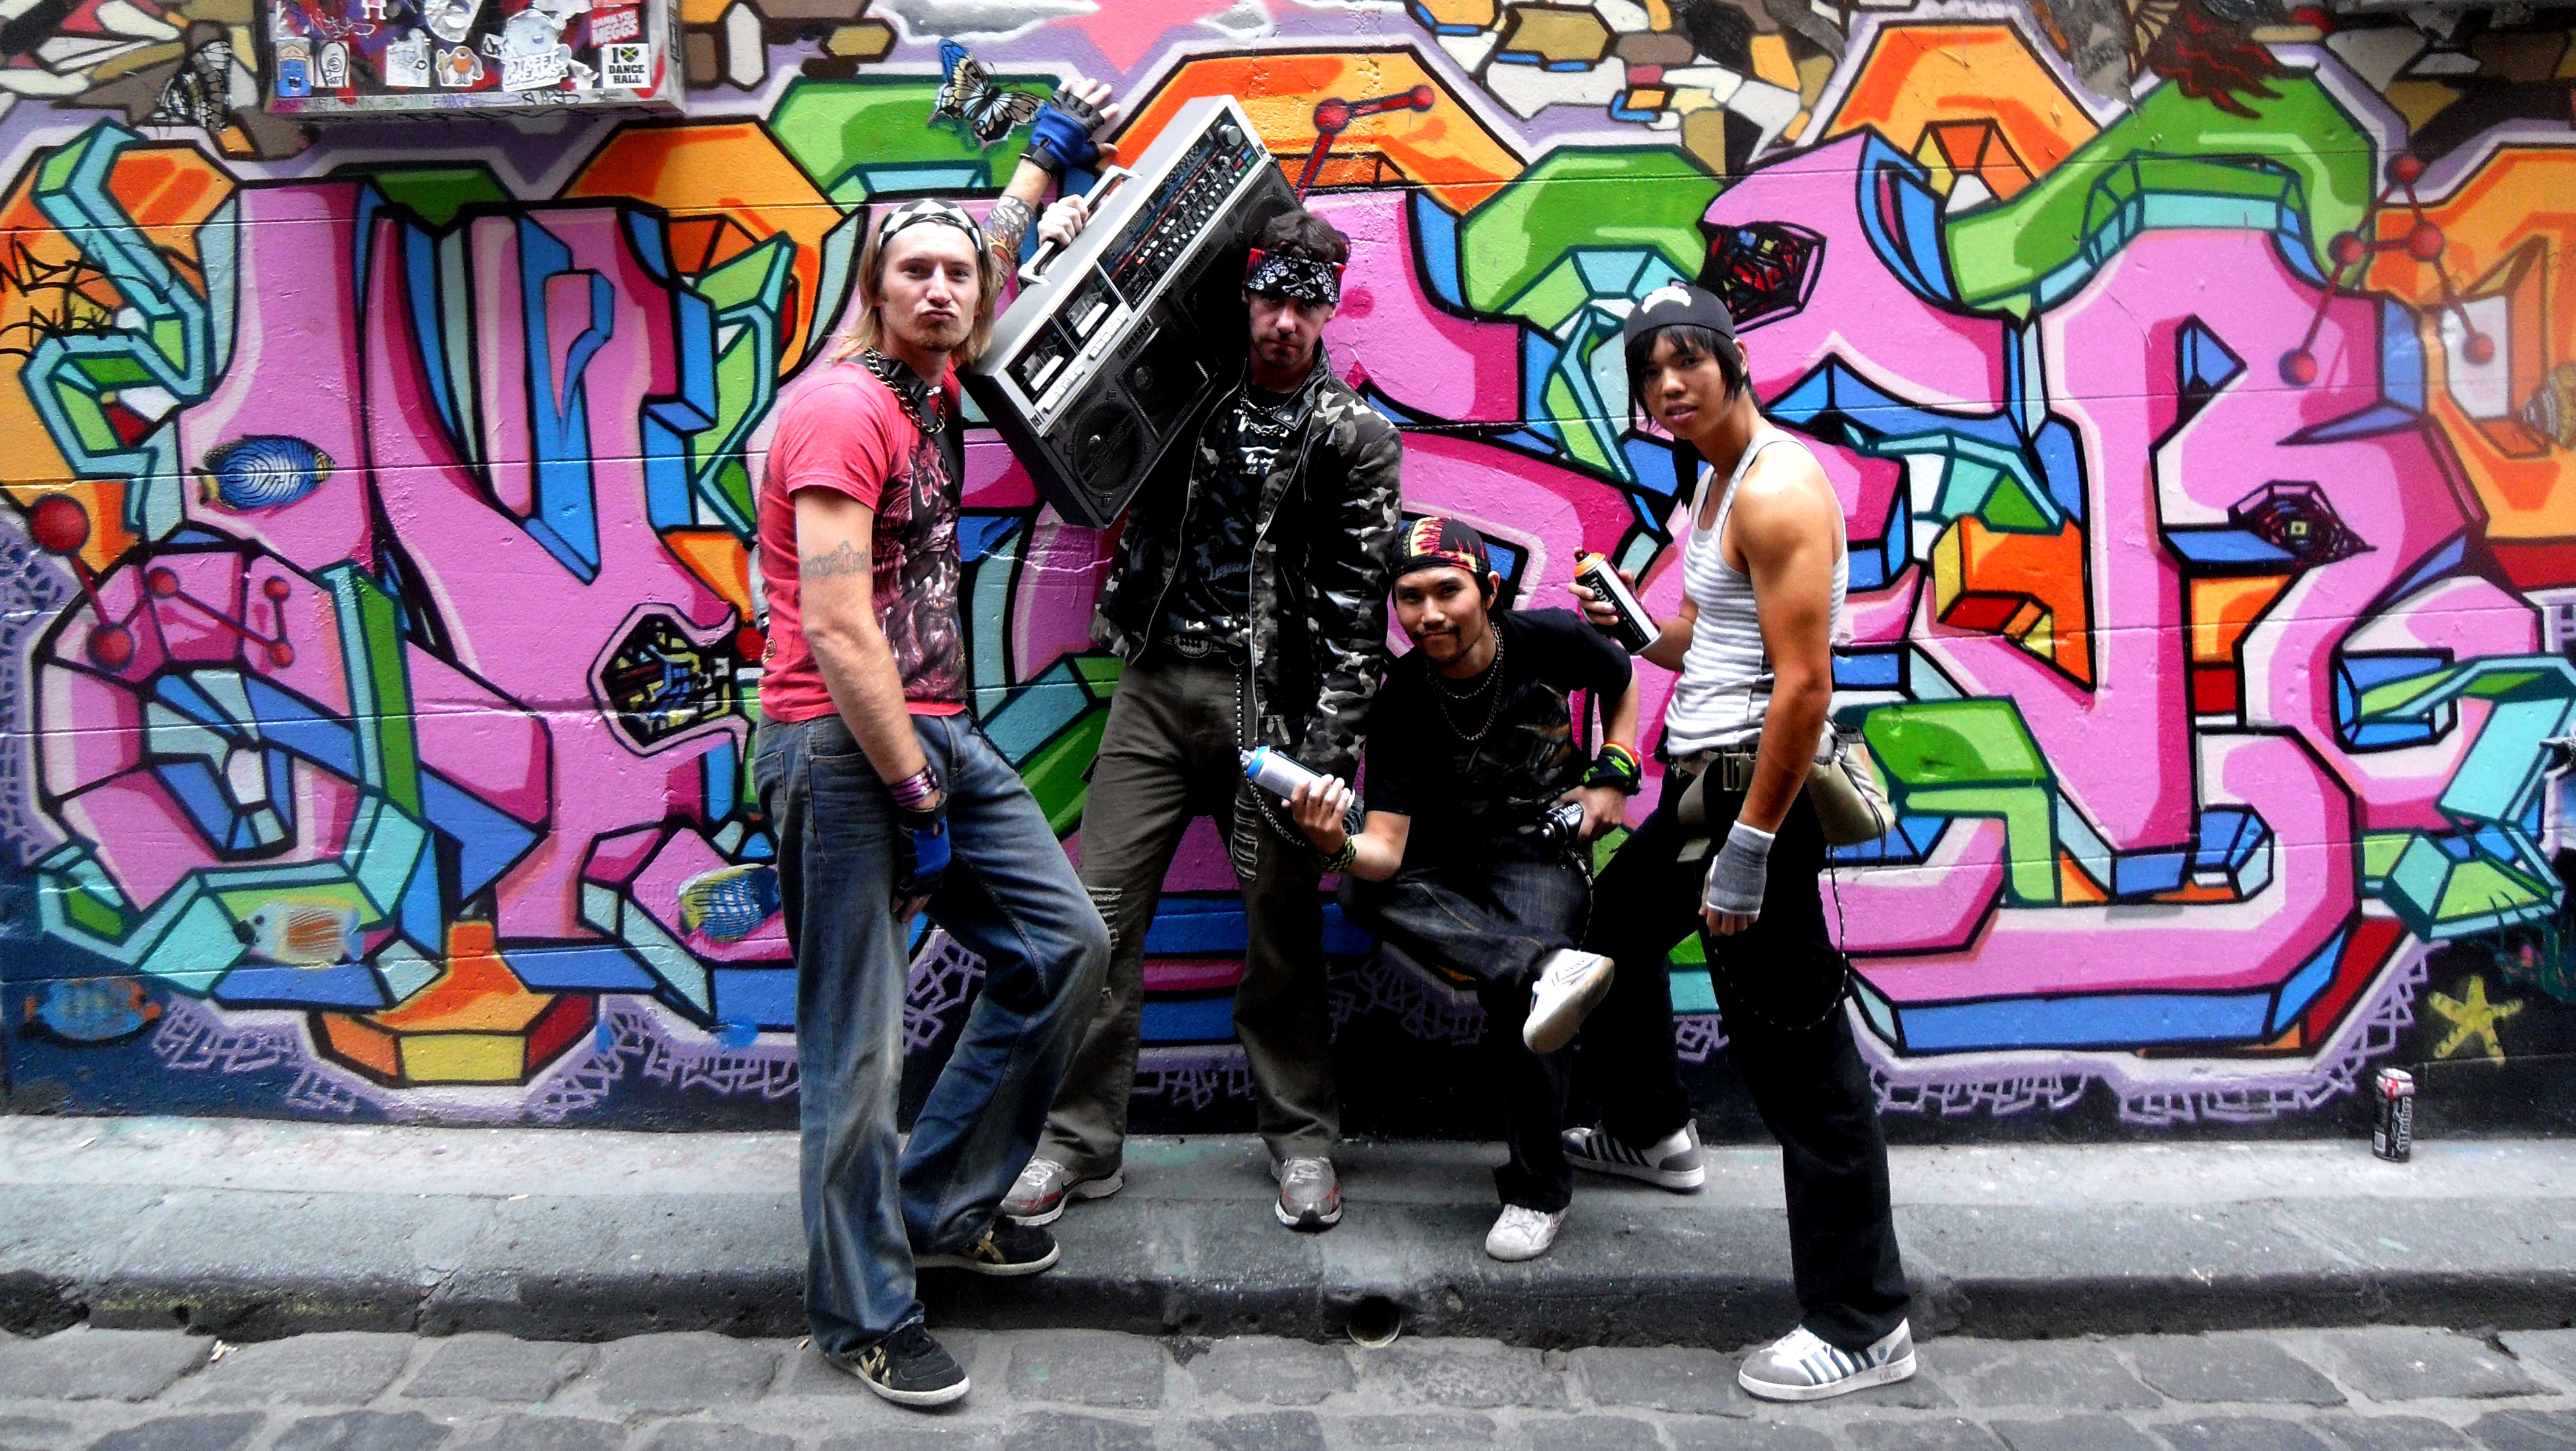 The Graffiti Gang from ORANGE, Tollywood film... stunt guys from left to right...Michael M. Foster, Chris Weir, Yasushi Asaya, Ri Jie Kwok on location in Hosier Lane Melbourne Victoria Australia